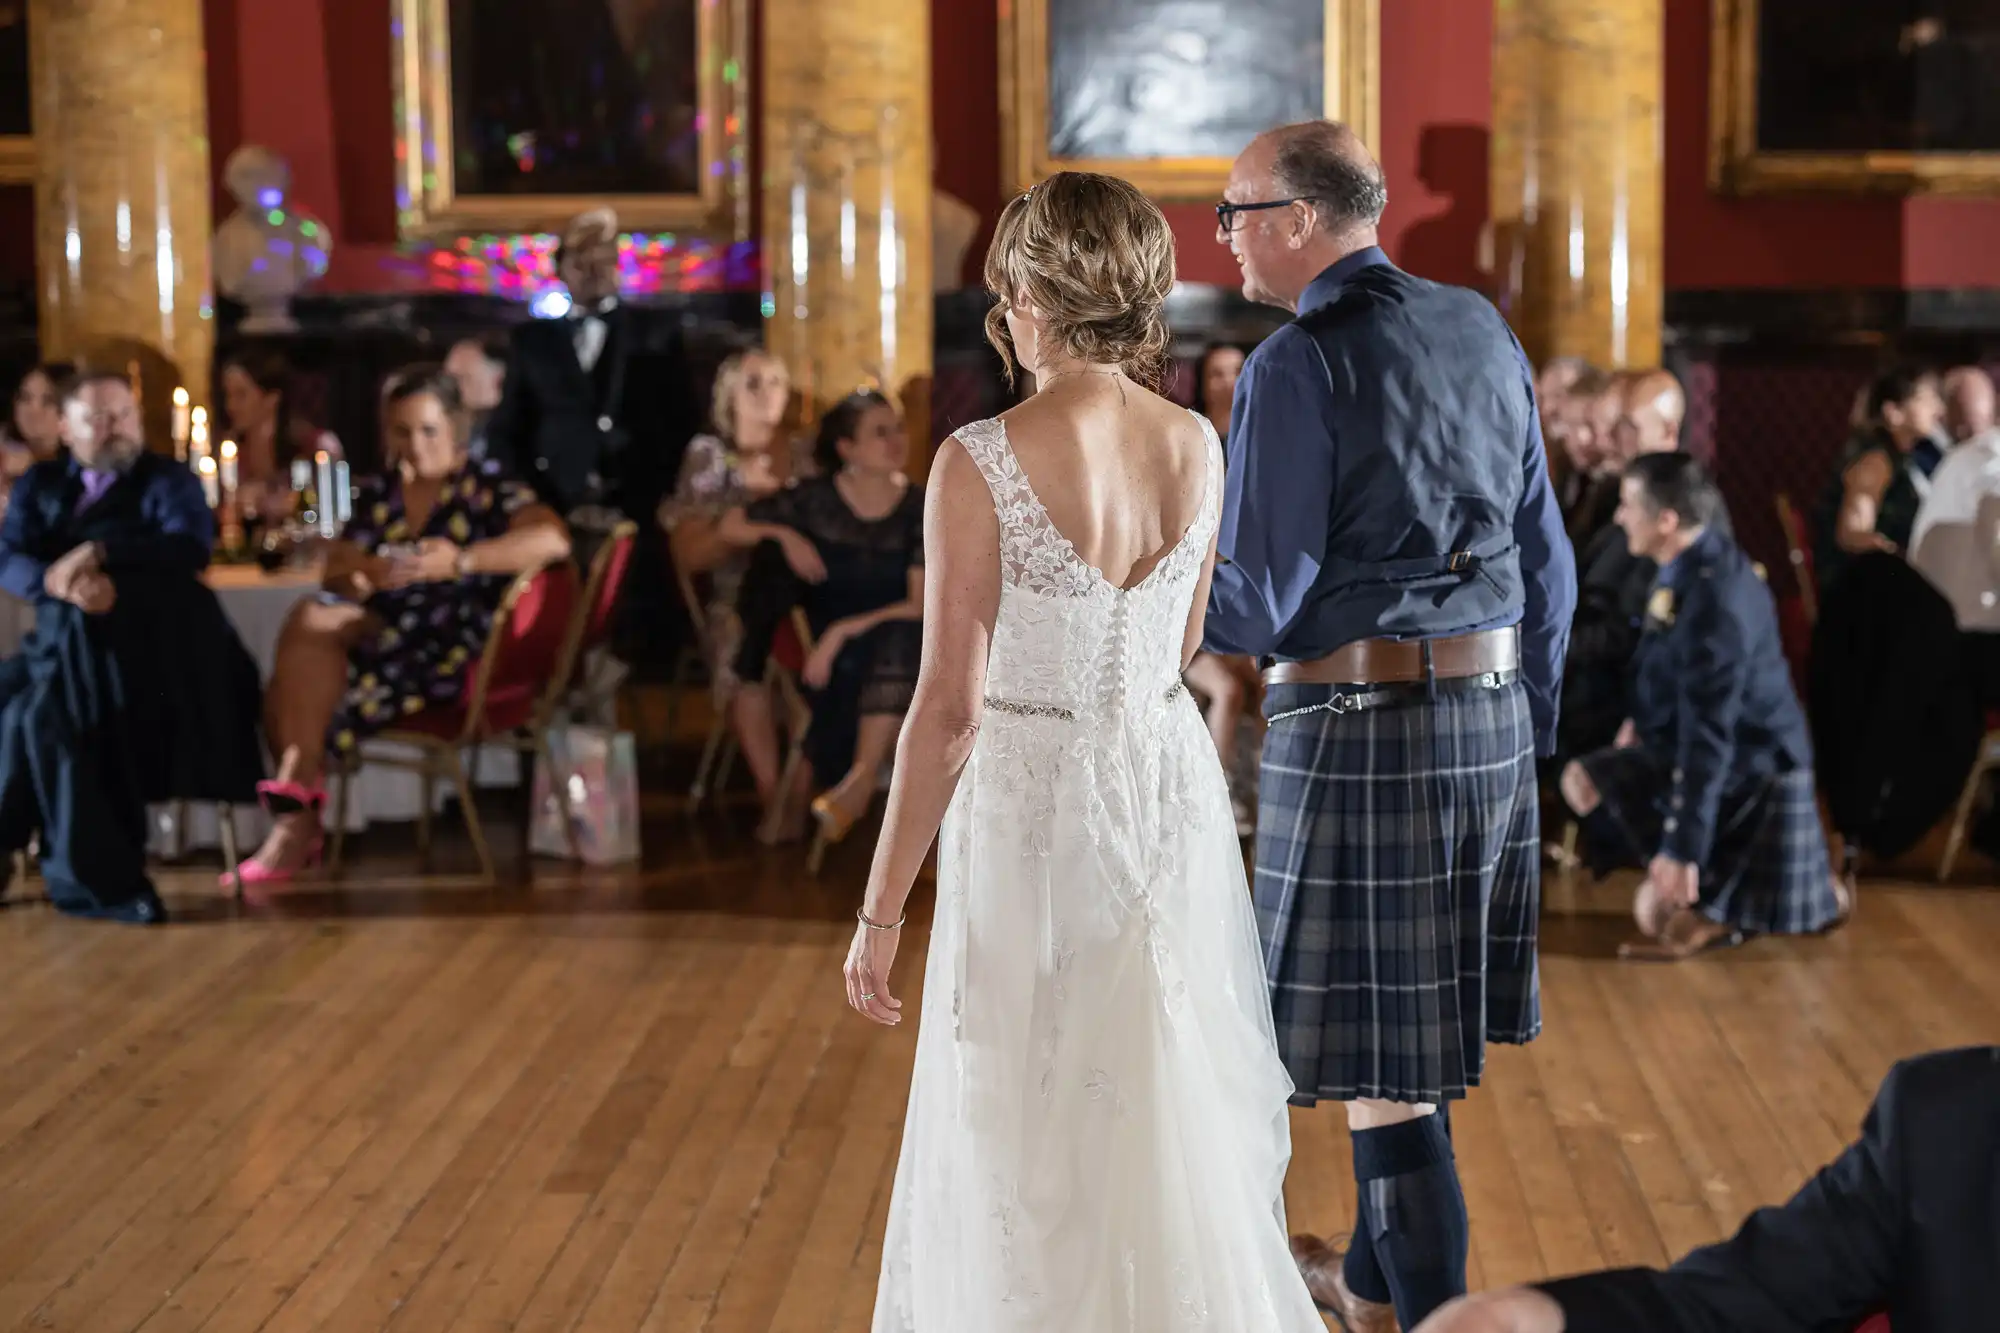 A couple wearing formal attire, including a white dress and a kilt, walk across a wooden floor in a dimly lit room with seated guests in the background.